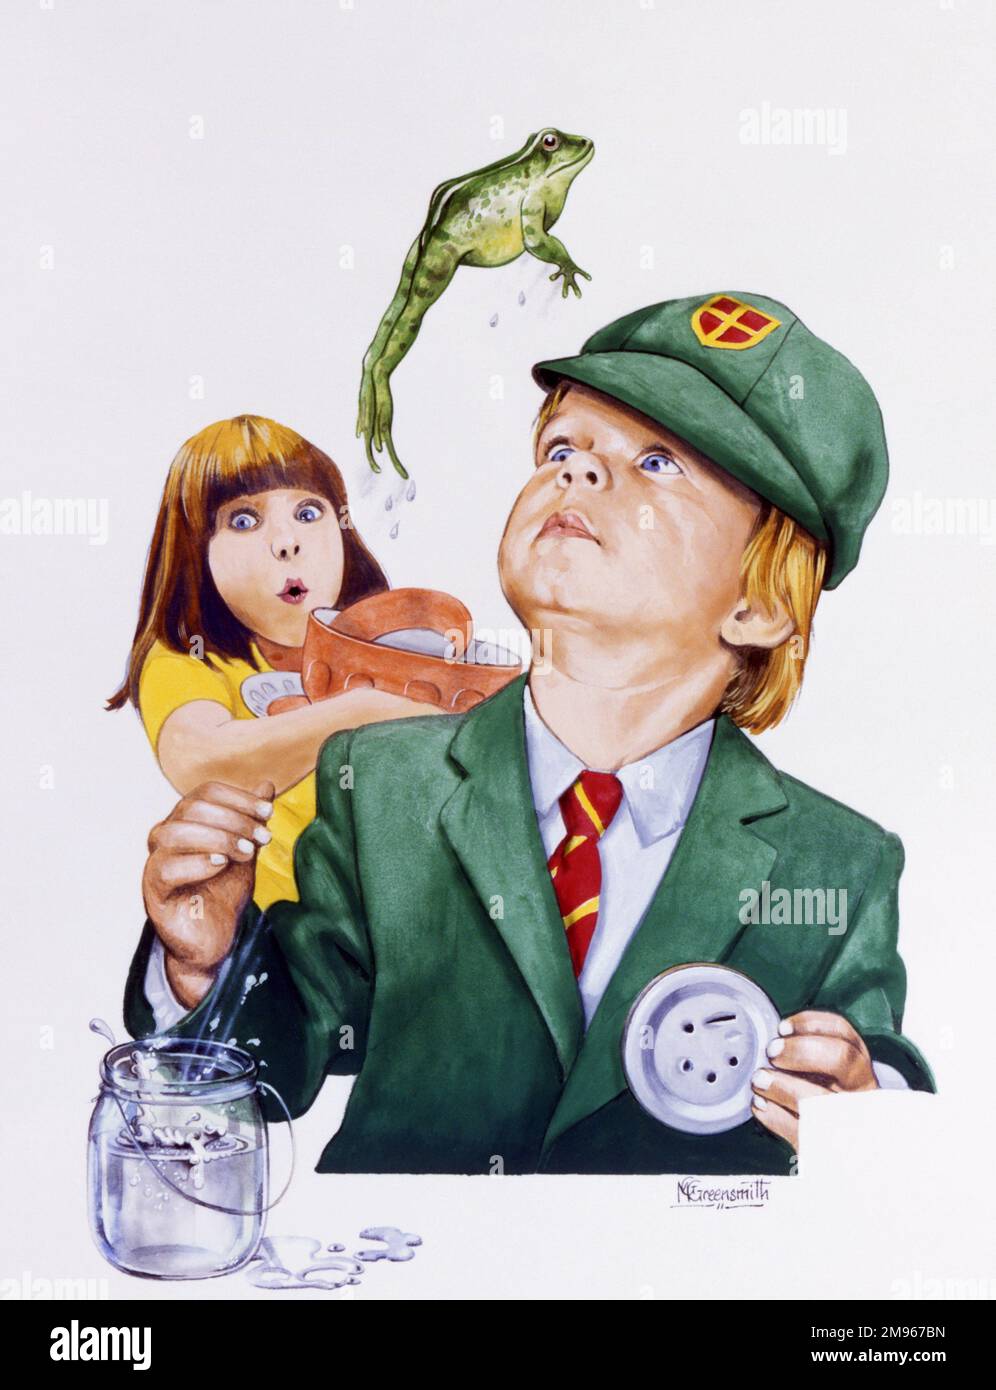 A young schoolboy in his full school uniform get a nasty surprise when the frog he has captured makes a daring bid for freedom, leaping out and away as soon as the airhole-added lid has been lifted. The girl in the background looks in danger of dropping the tottering pile of crockery in her arms! Watercolour painting by Malcolm Greensmith Stock Photo